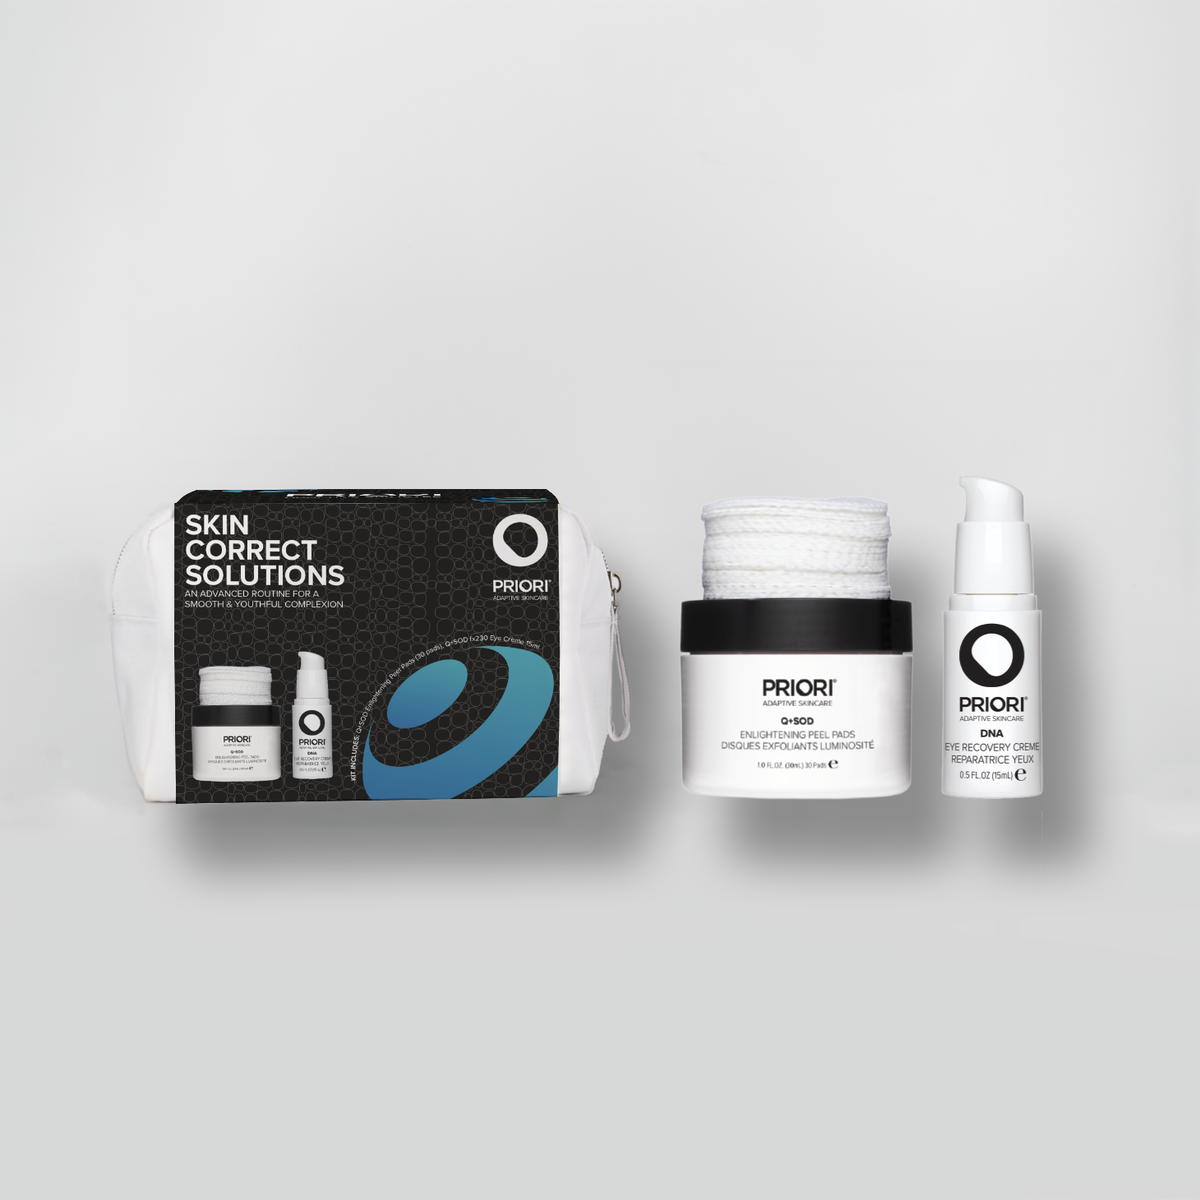 Priori Skin Correct Solutions Limited Edition Pack